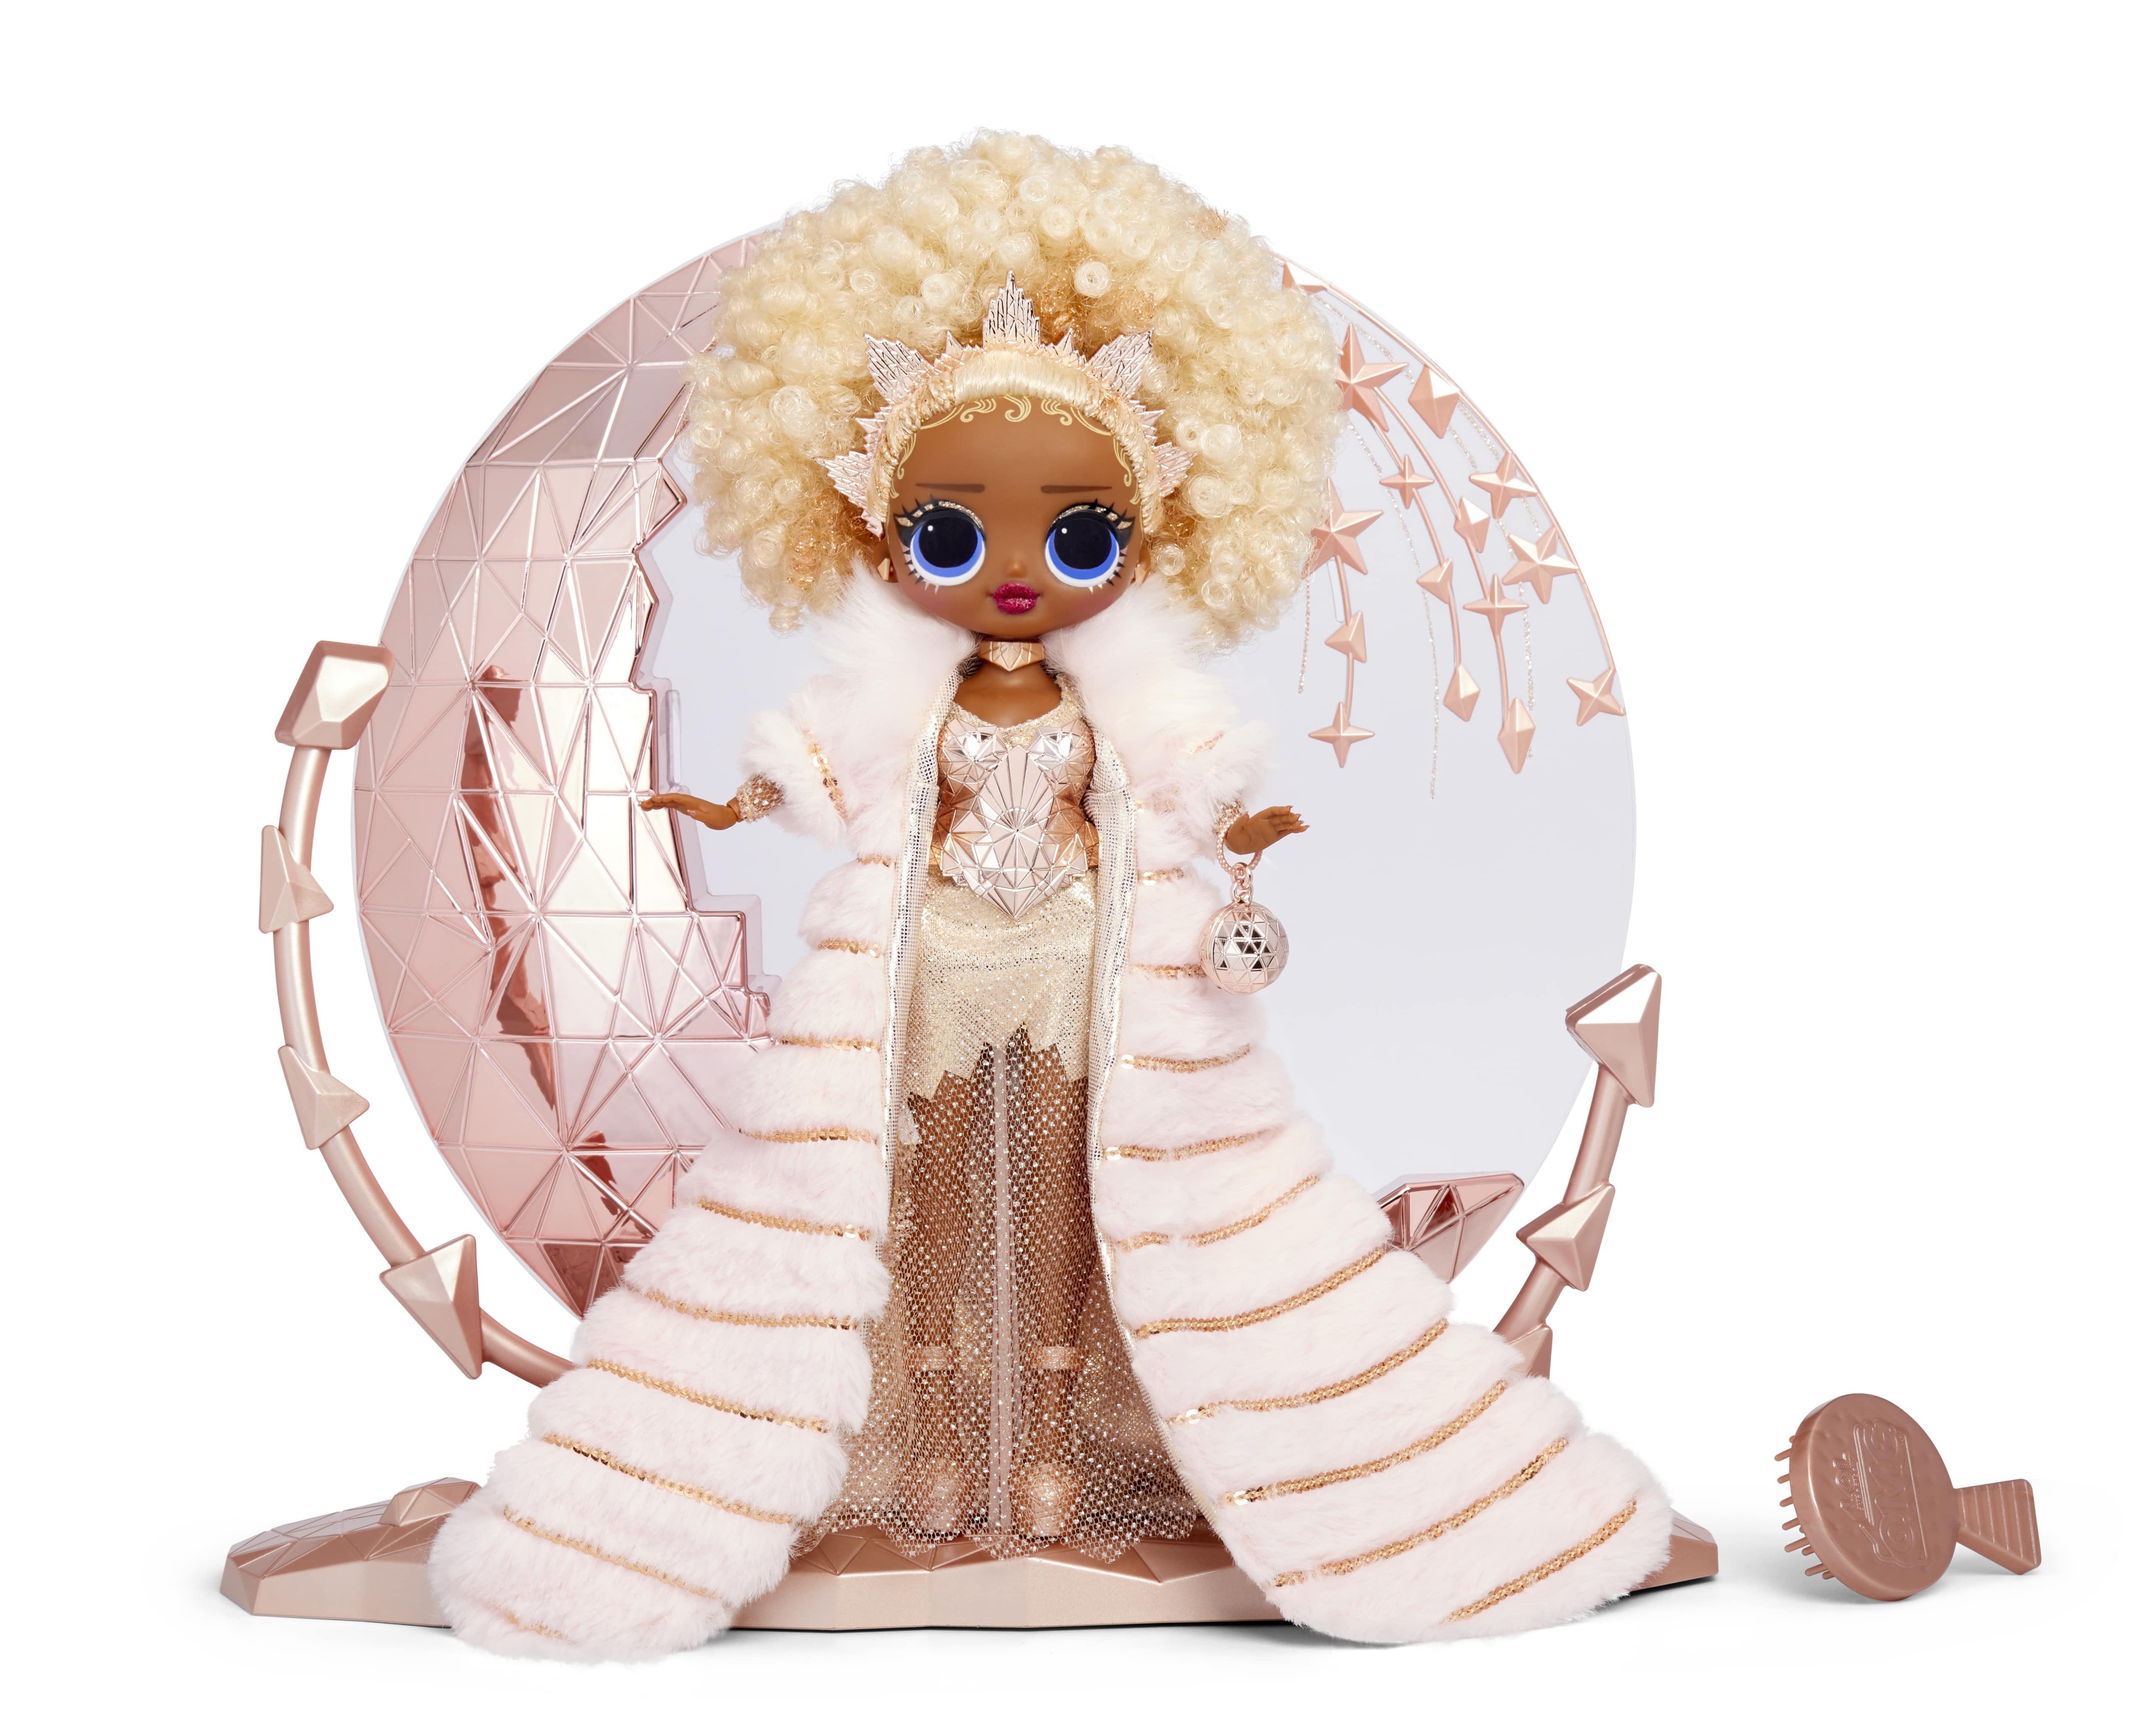 New LOL Surprise 2021 OMG Collector Edition Fashion Doll *NYE QUEEN*